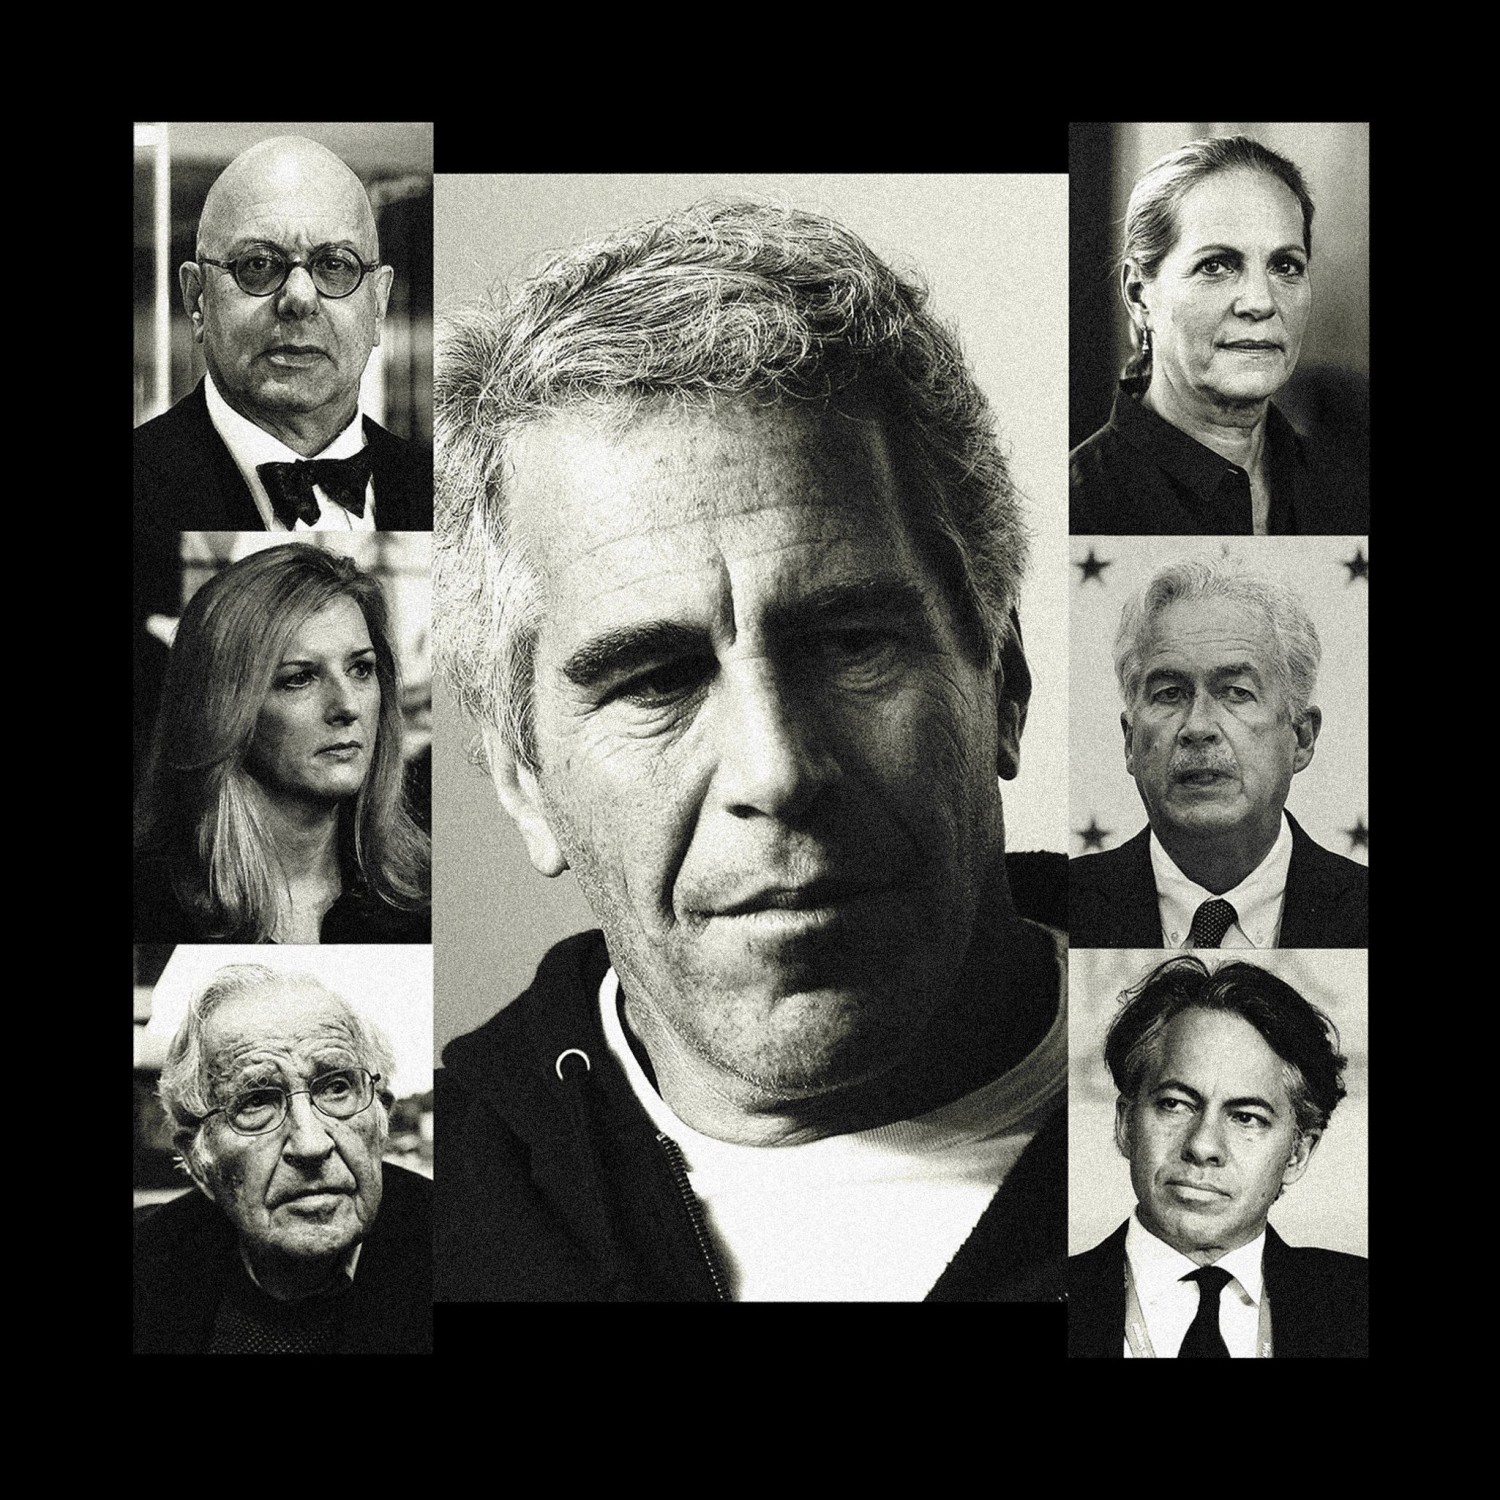 Epstein’s Private Calendar Reveals Prominent Names, Including CIA Chief, Goldman’s Top Lawyer